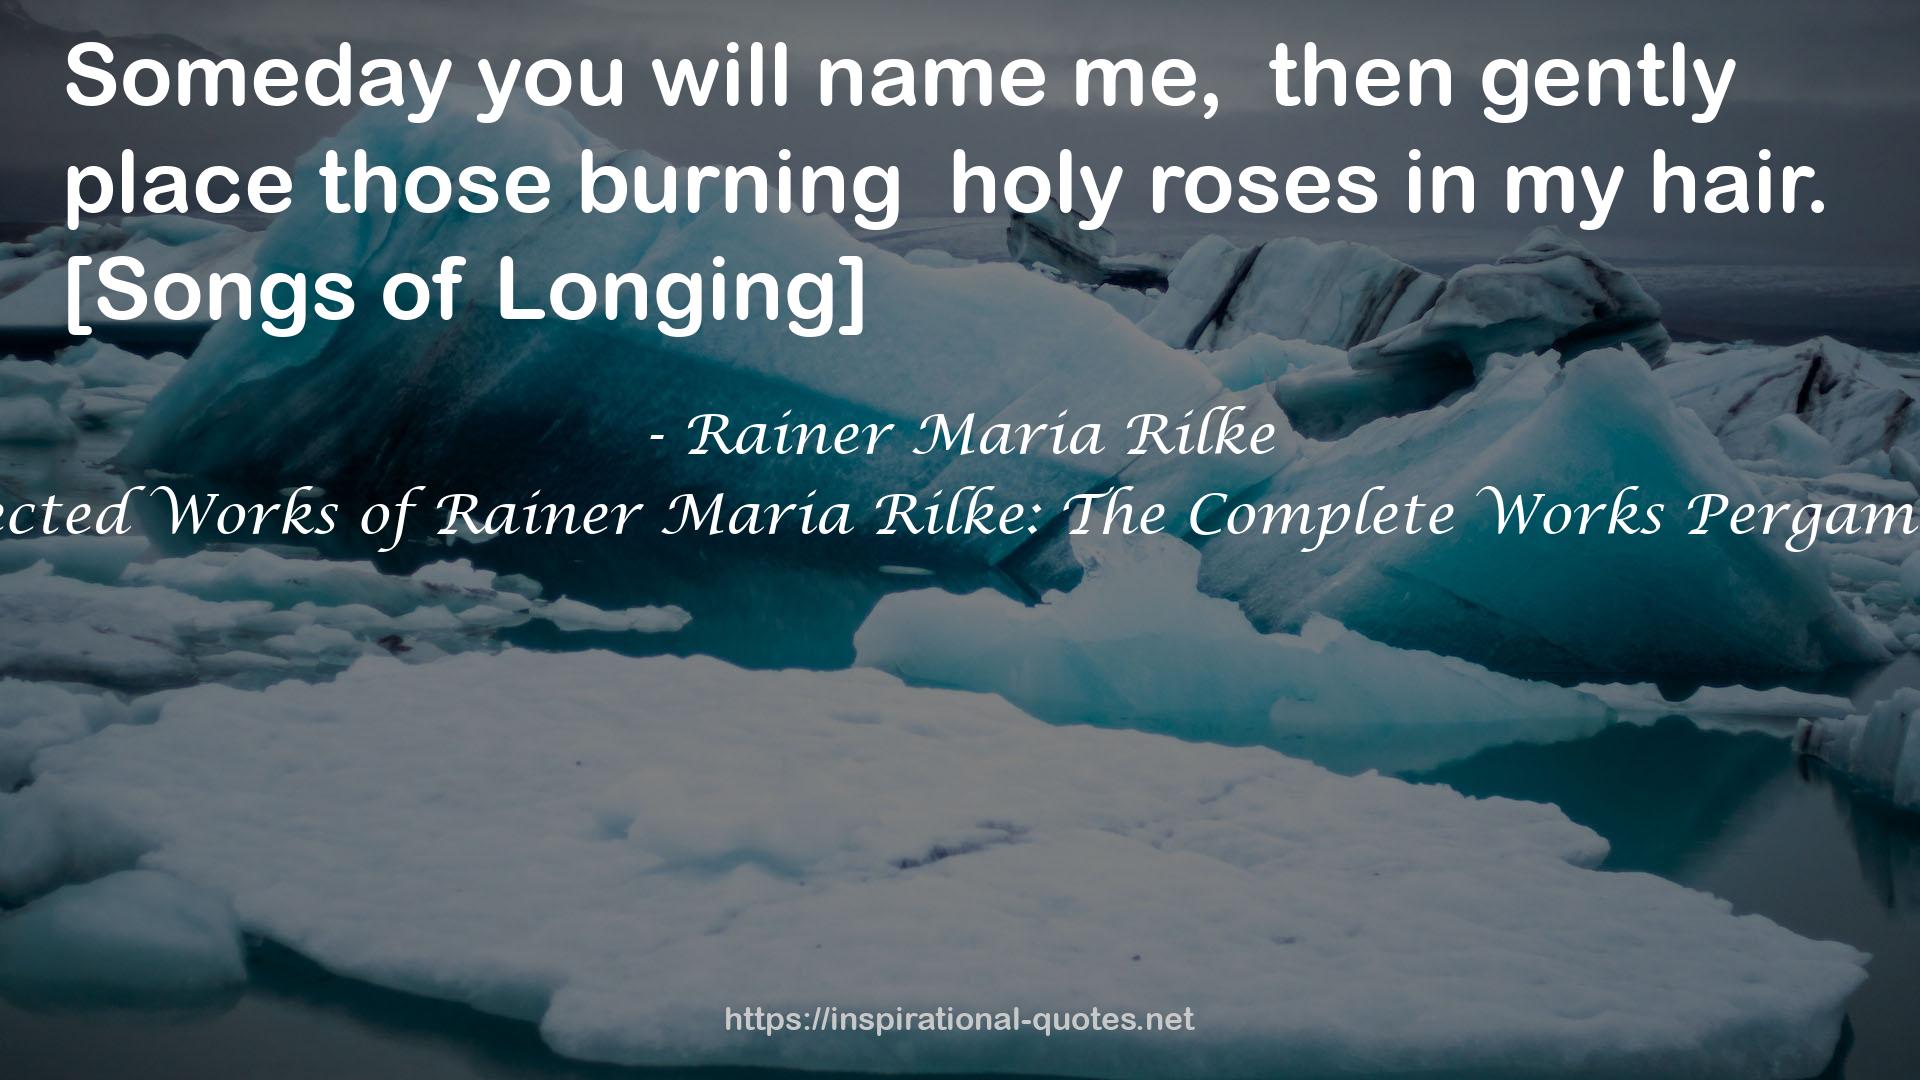 The Collected Works of Rainer Maria Rilke: The Complete Works PergamonMedia QUOTES